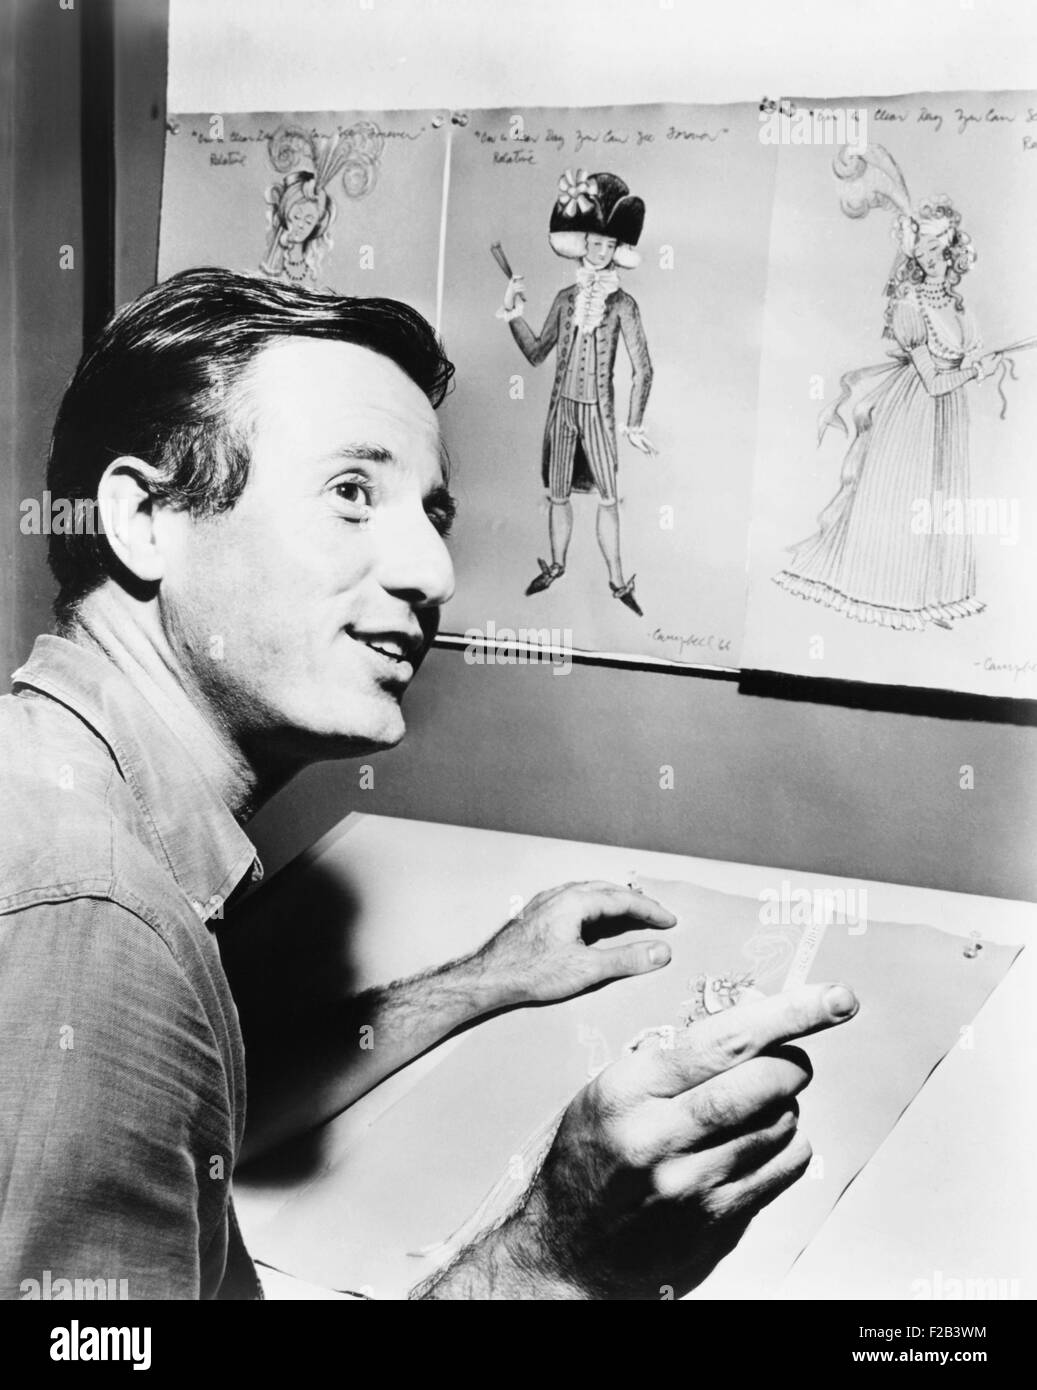 Designer Patton Campbell creates costumes for 'On an Clear Day You Can See Forever'. Sept. 19, 1966. He received a Tony award nomination for his costumes for 'Man of La Mancha'. He designed extensively for New York City Opera for over twenty years. Campbell was on the faculty of New York University. - (CSU 2015 5 25) Stock Photo